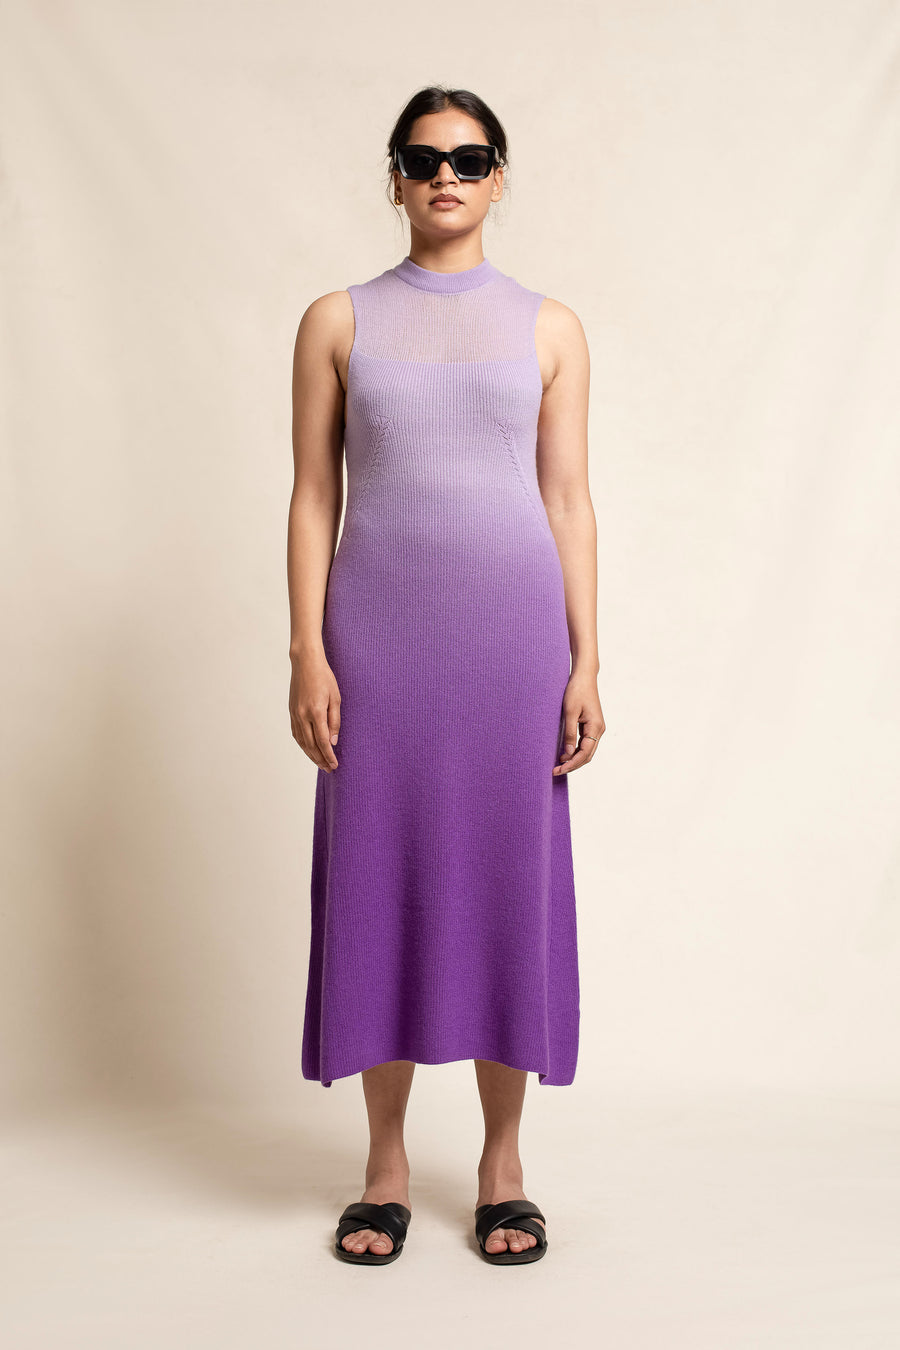 The Ombre Dress